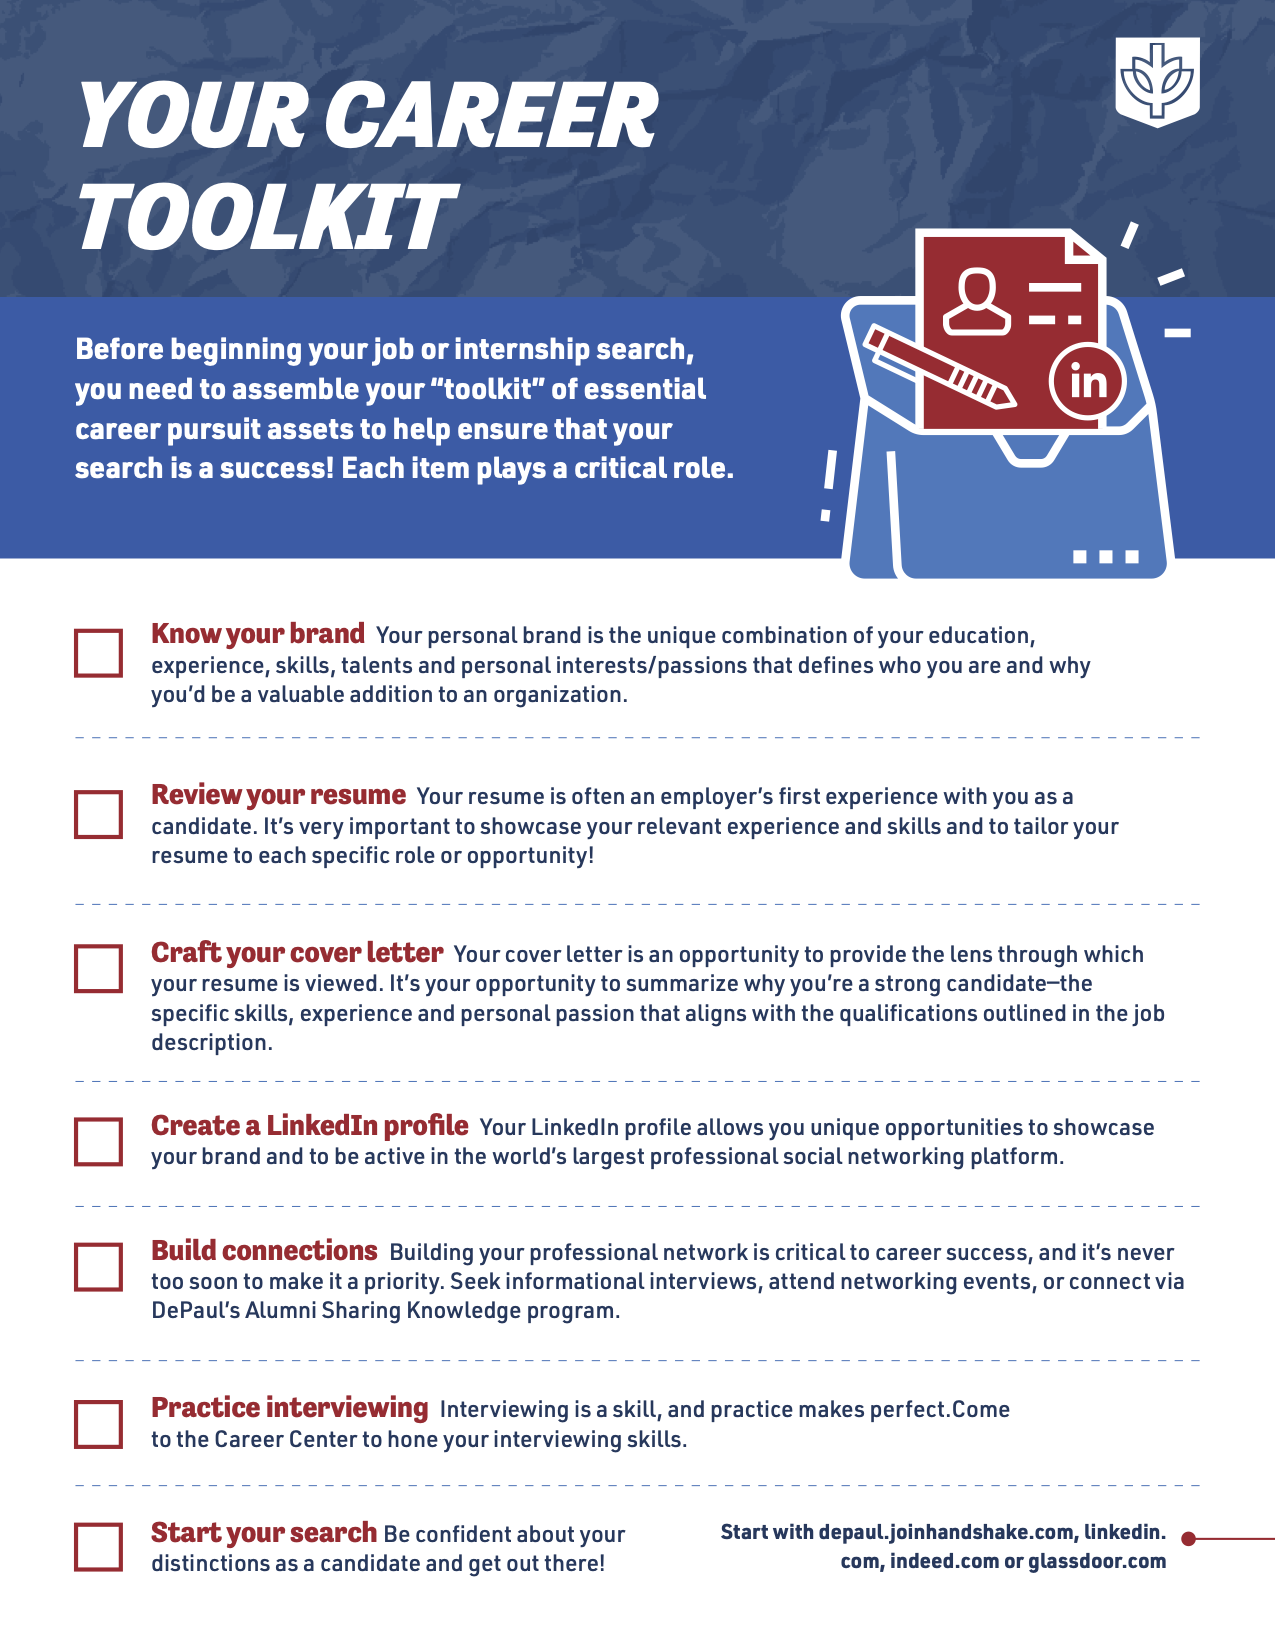 Building Your Career Toolkit